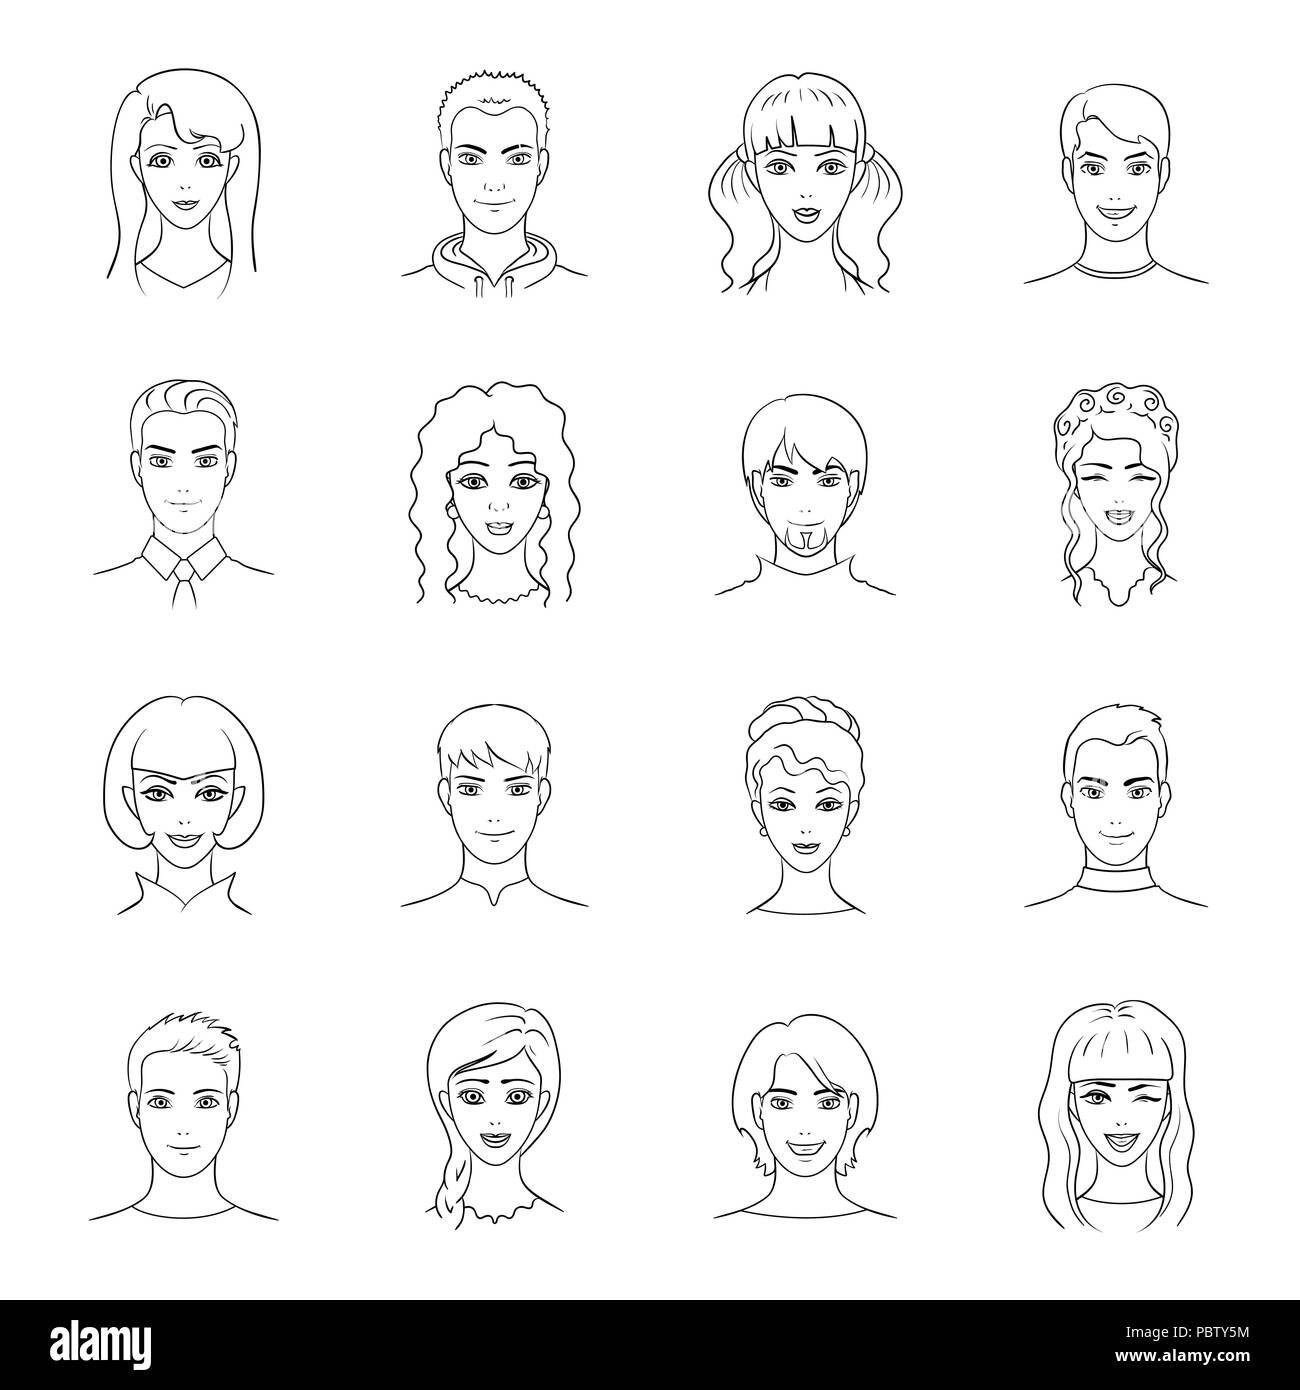 appearance,art,athlete,avatar,bald,beard,boy,collection,design,dress,face,facial expression,fashion,girl,glasses,grandfather,grandmother,hairstyle,head,human,icon,illustration,isolated,logo,man,mustache,outline,outside,people,person,portrait,set,sign,stepfather,stepmother,style,symbol,teacher,tie,user,vector,web,woman,working Vector Vectors , Stock Vector